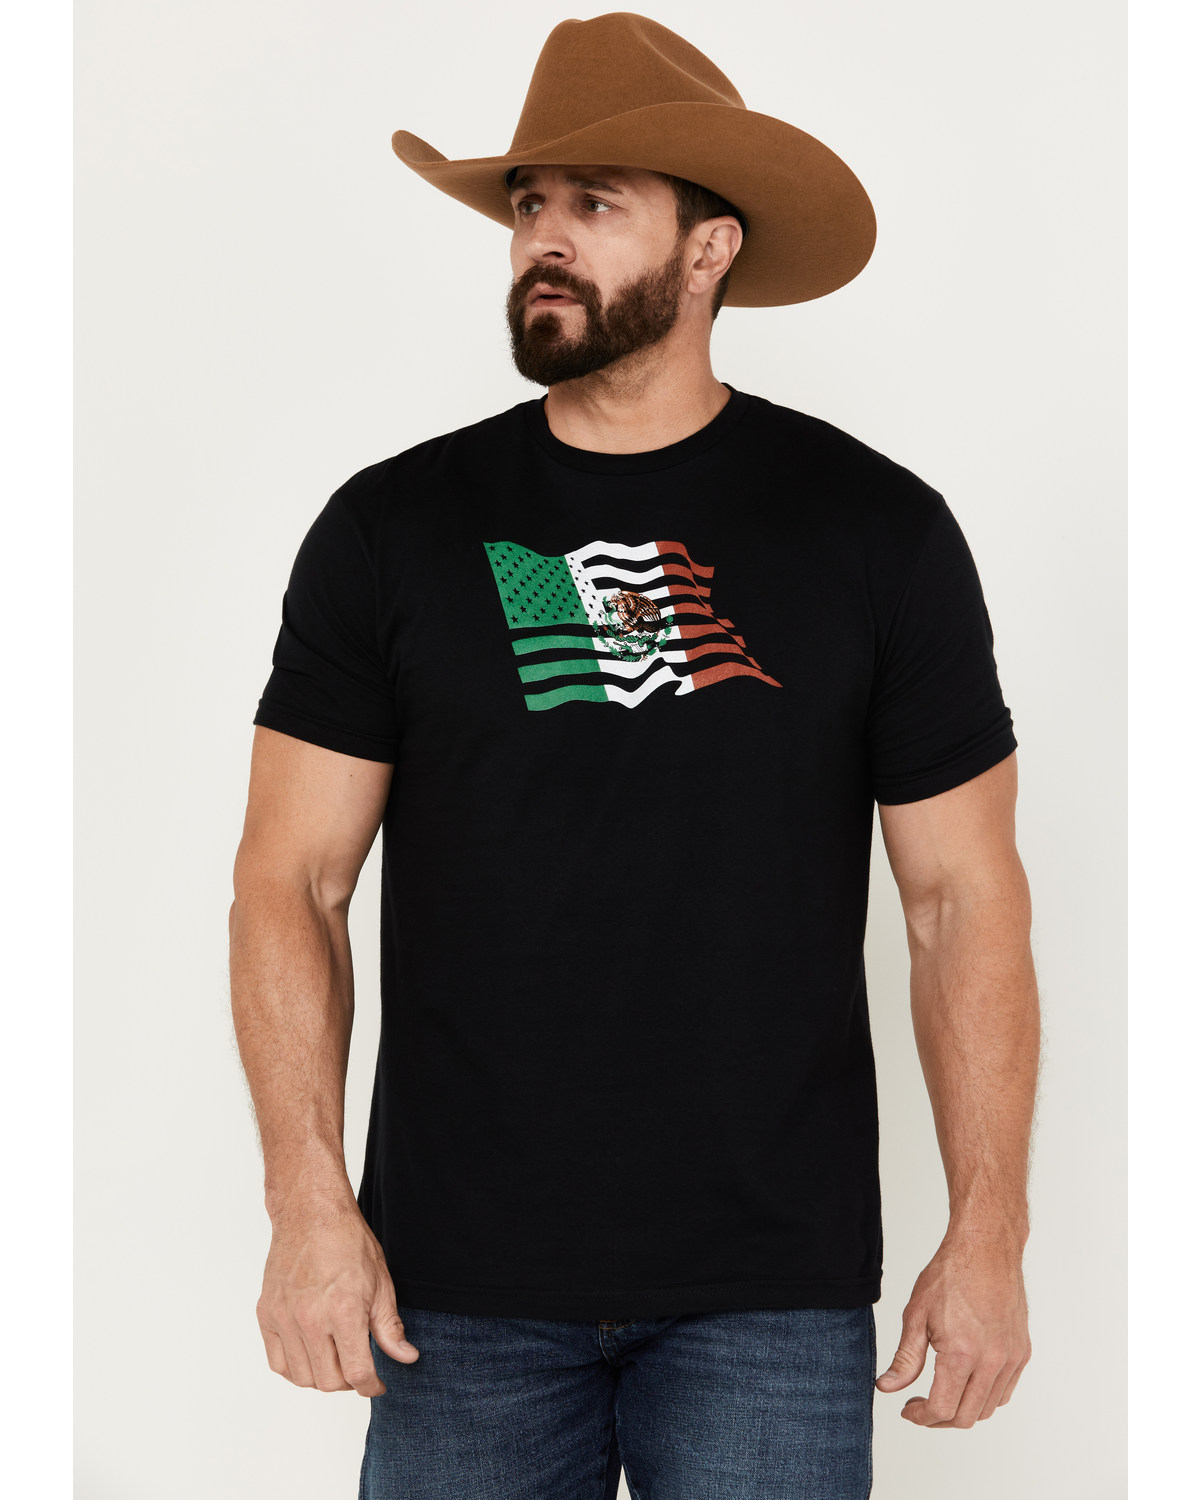 Cowboy Hardware Men's Mexican American Flag Short Sleeve Graphic T-Shirt